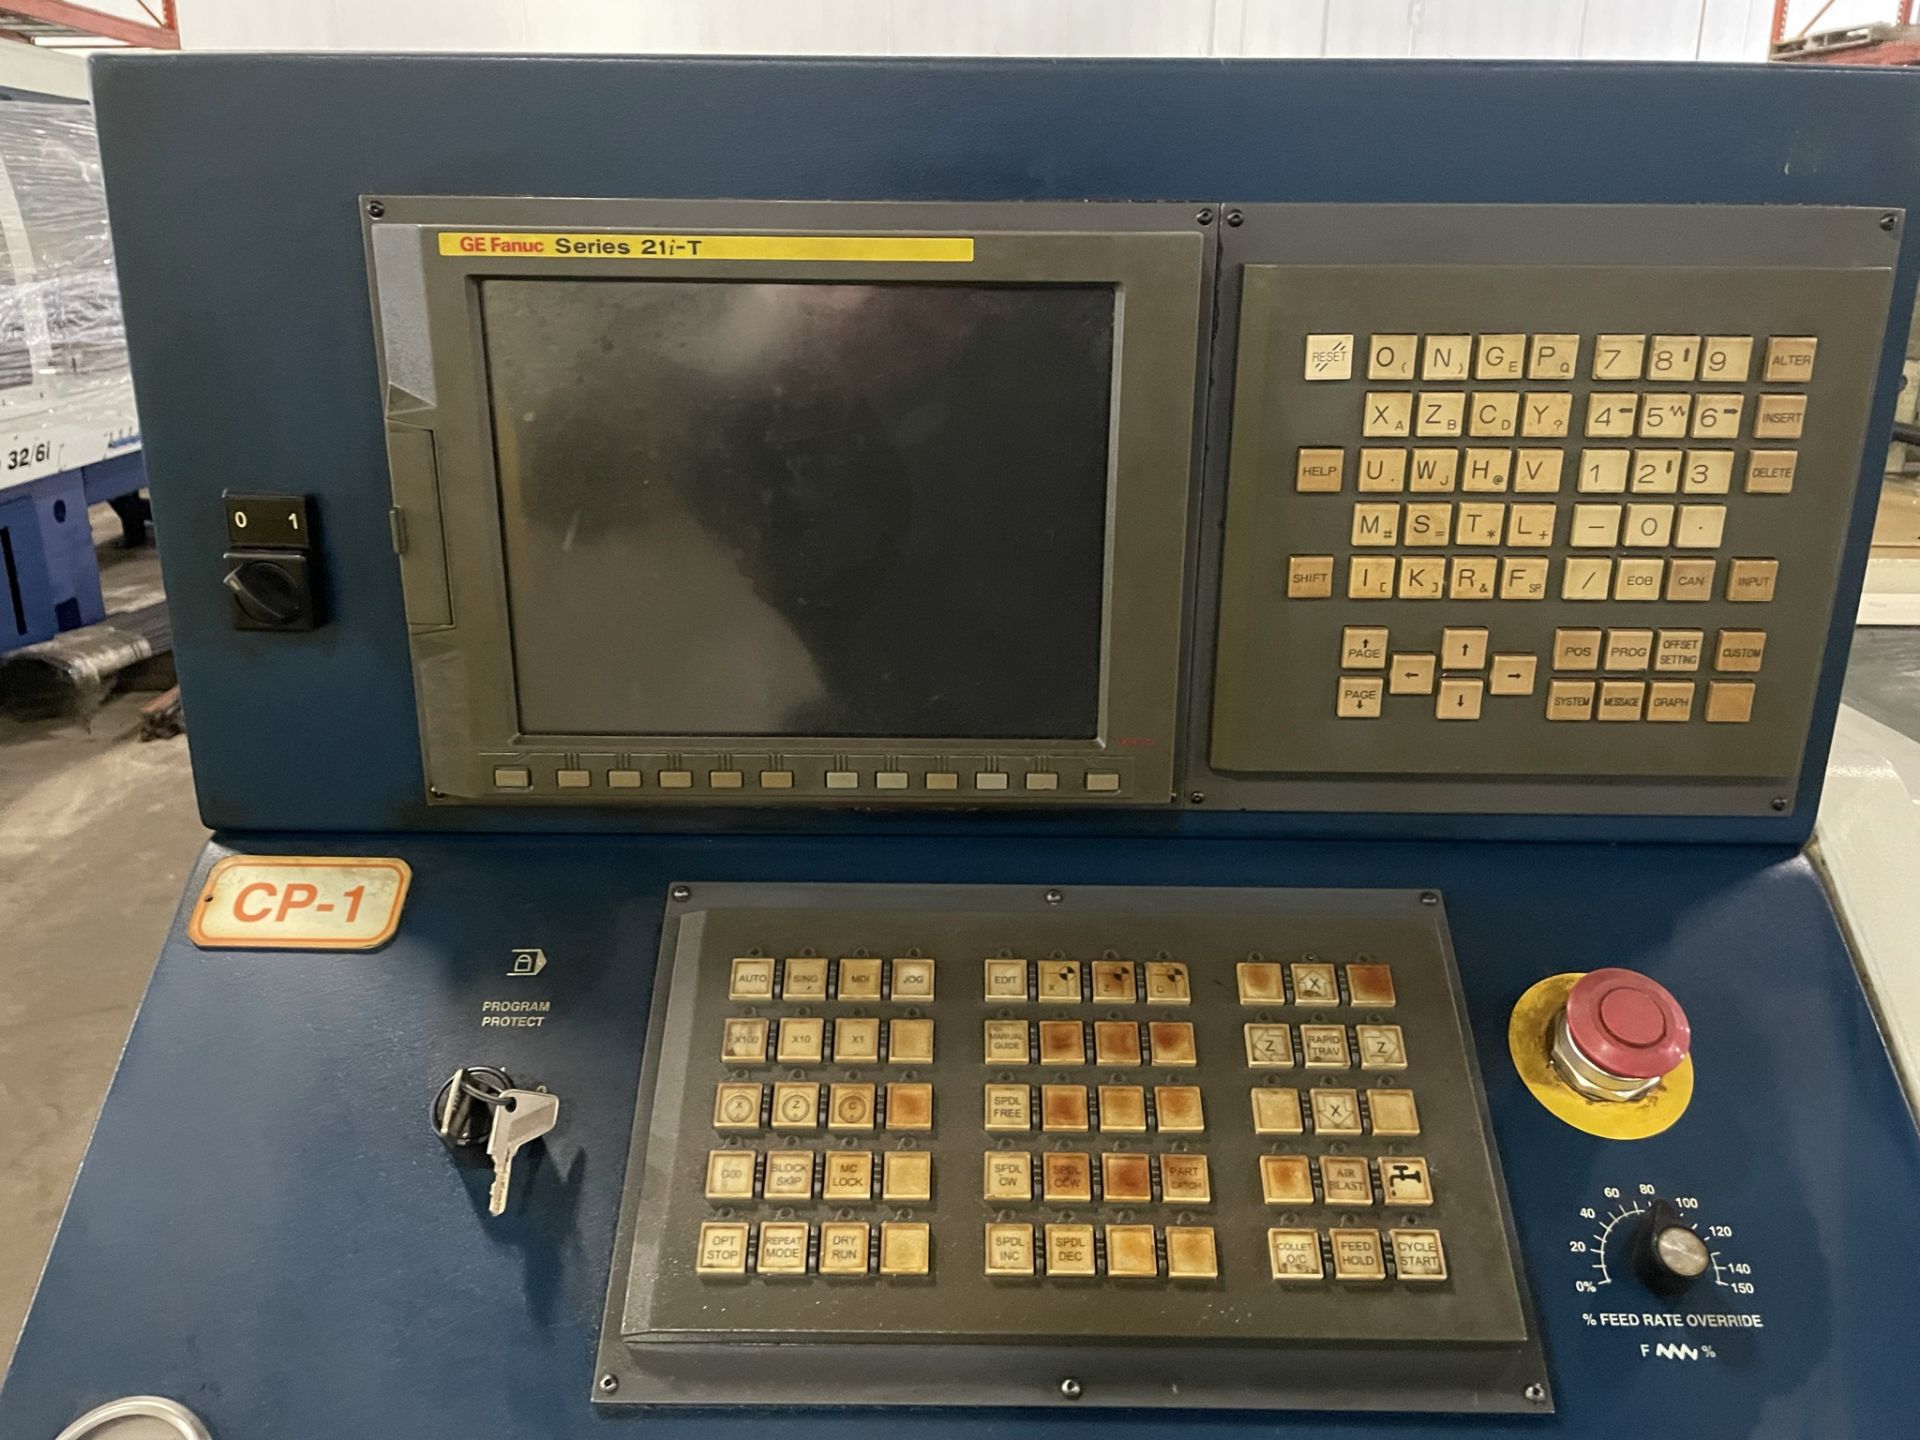 Hardinge Quest GT27SP CNC Gang Type Tool Turning Center, Mfg. 2003 with GE/Fanuc Series 21i-T CNC - Image 2 of 6